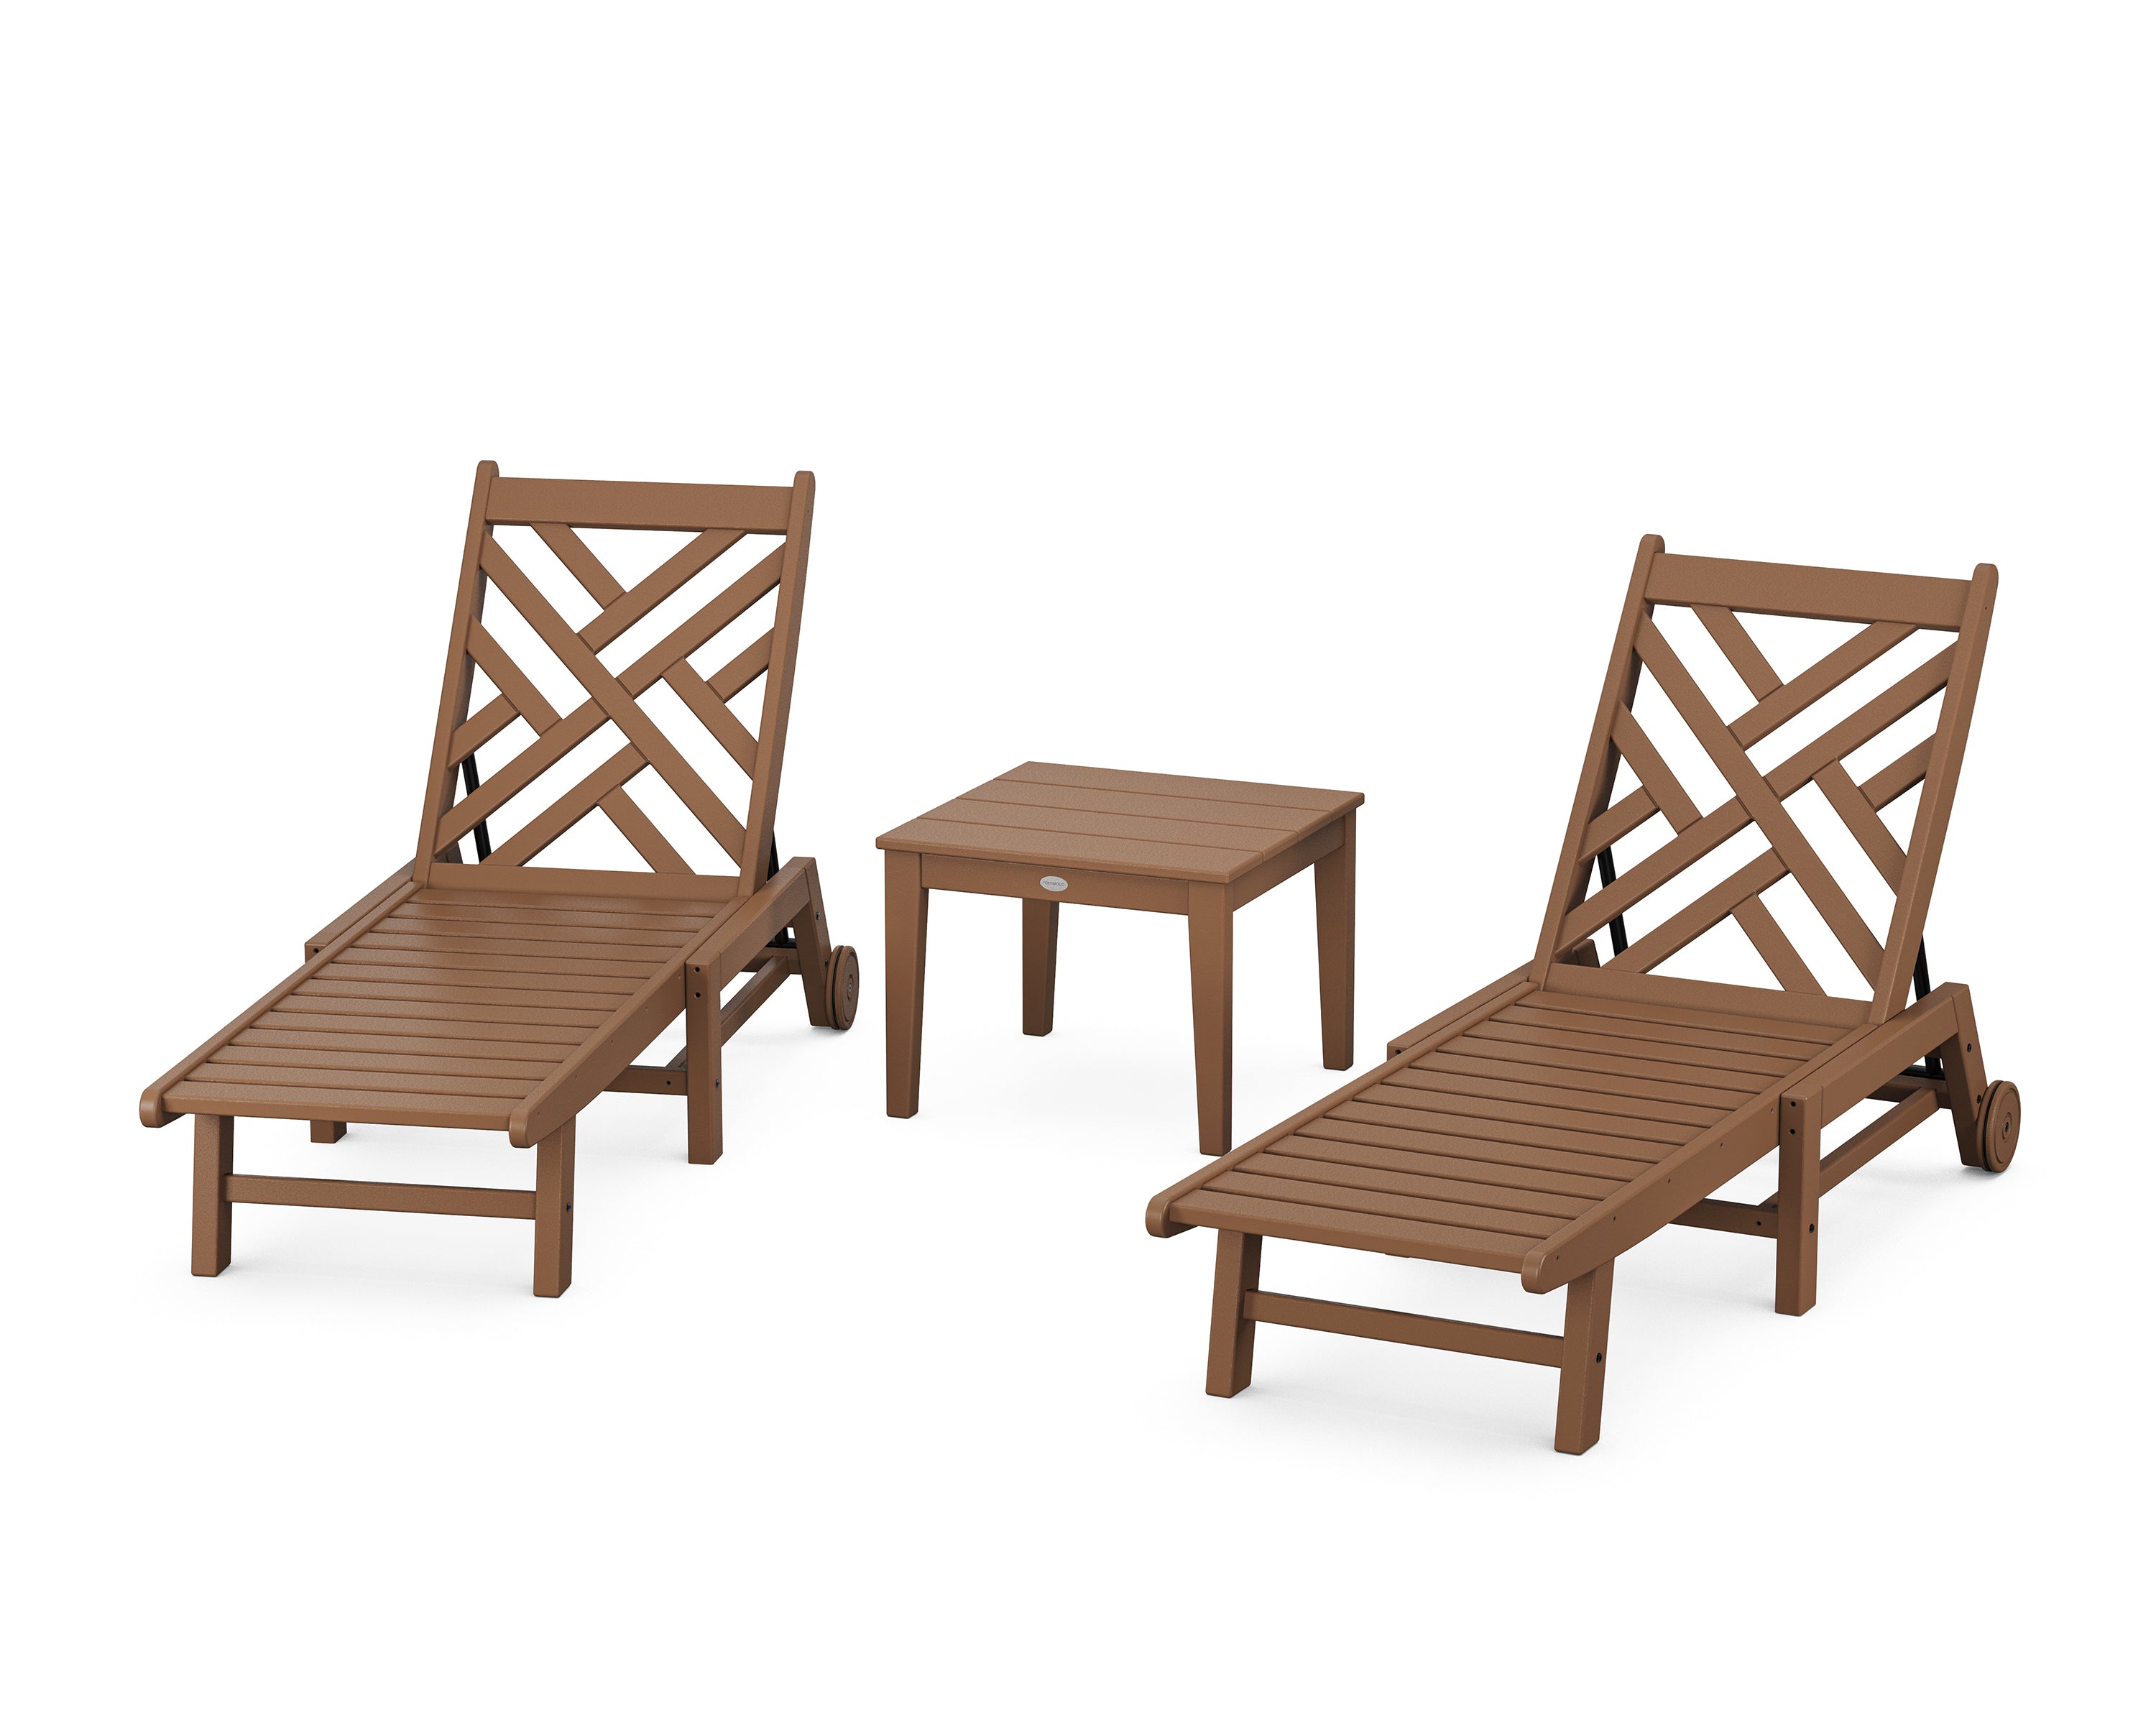 POLYWOOD Chippendale 3-Piece Chaise Set with Wheels in Teak